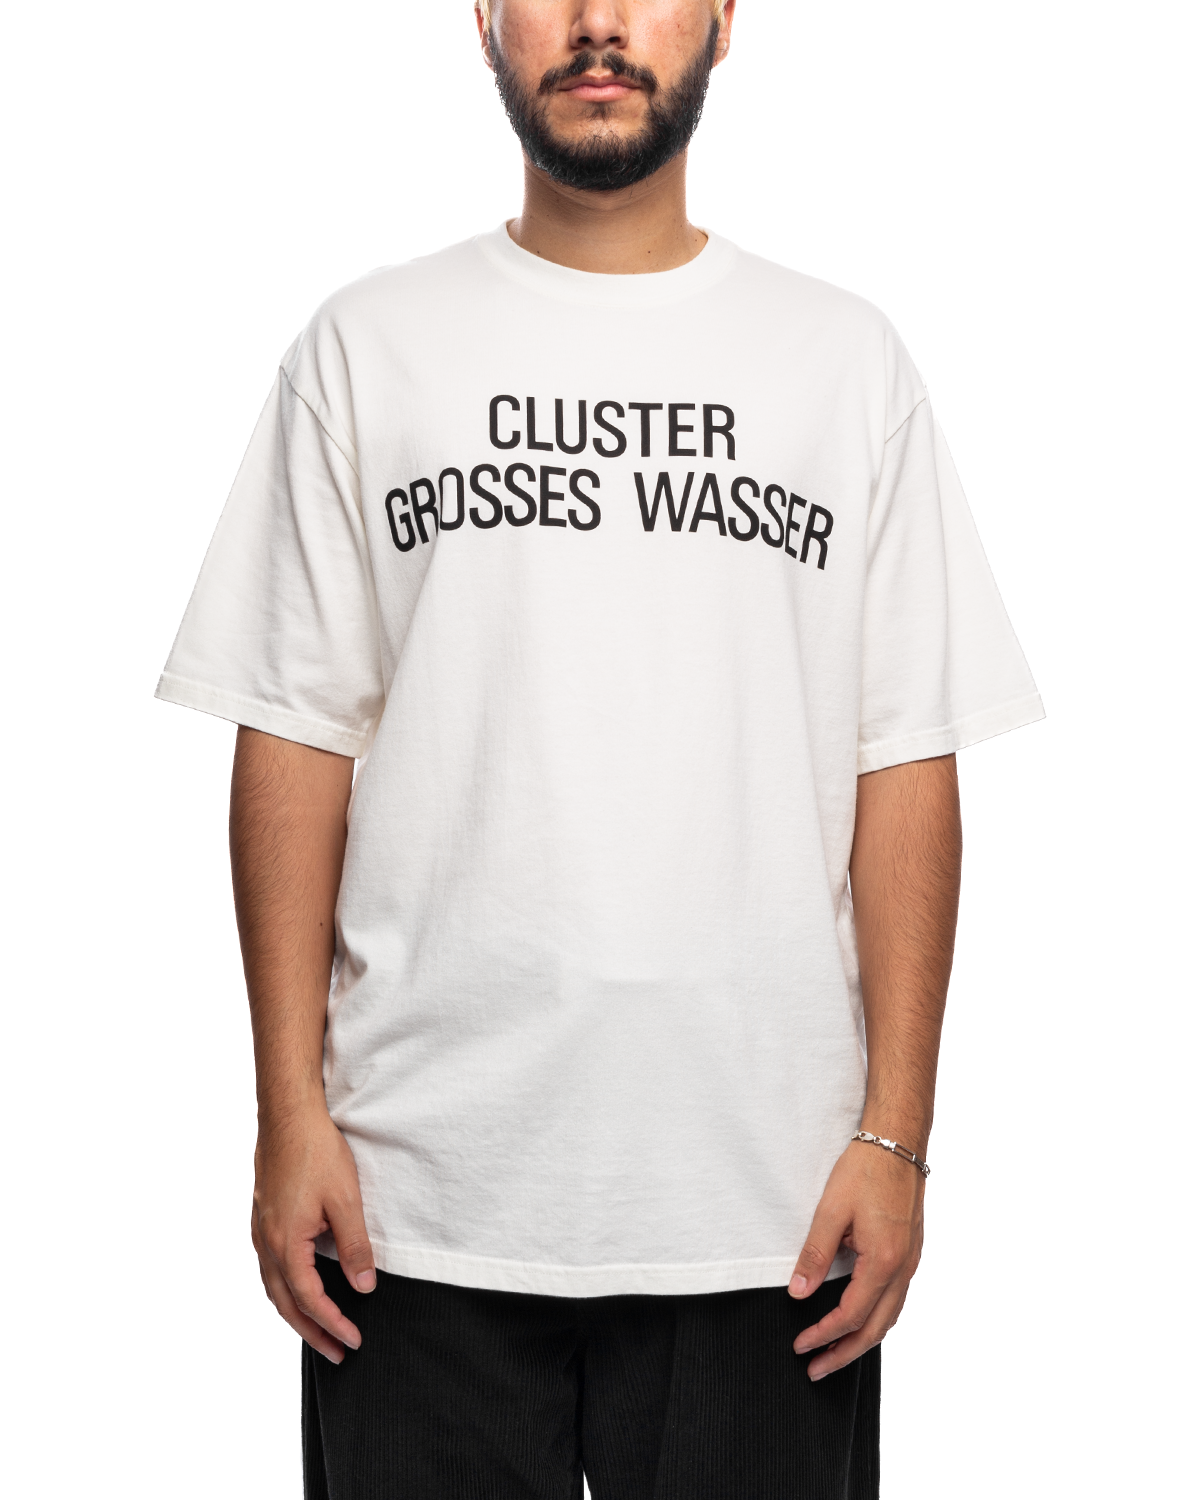 UC2C3811 Cluster Grosses Wasser Tee Off White